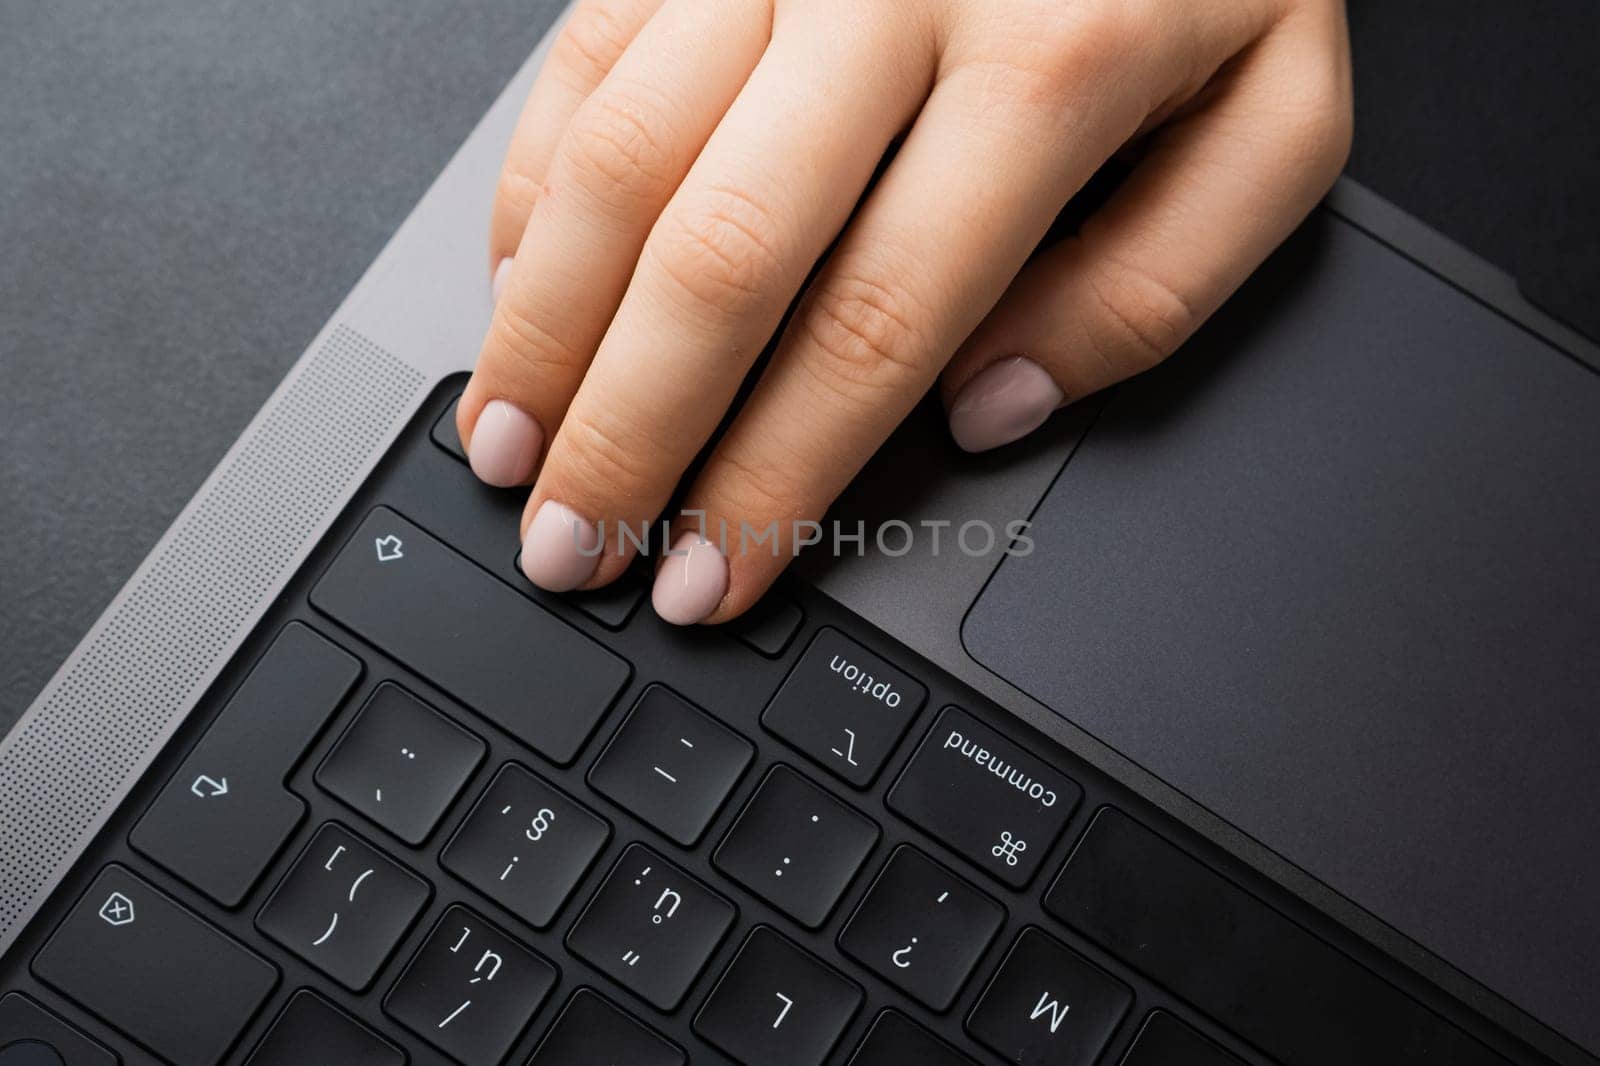 Female keeps fingers on arrows on keyboard for playing games by vladimka